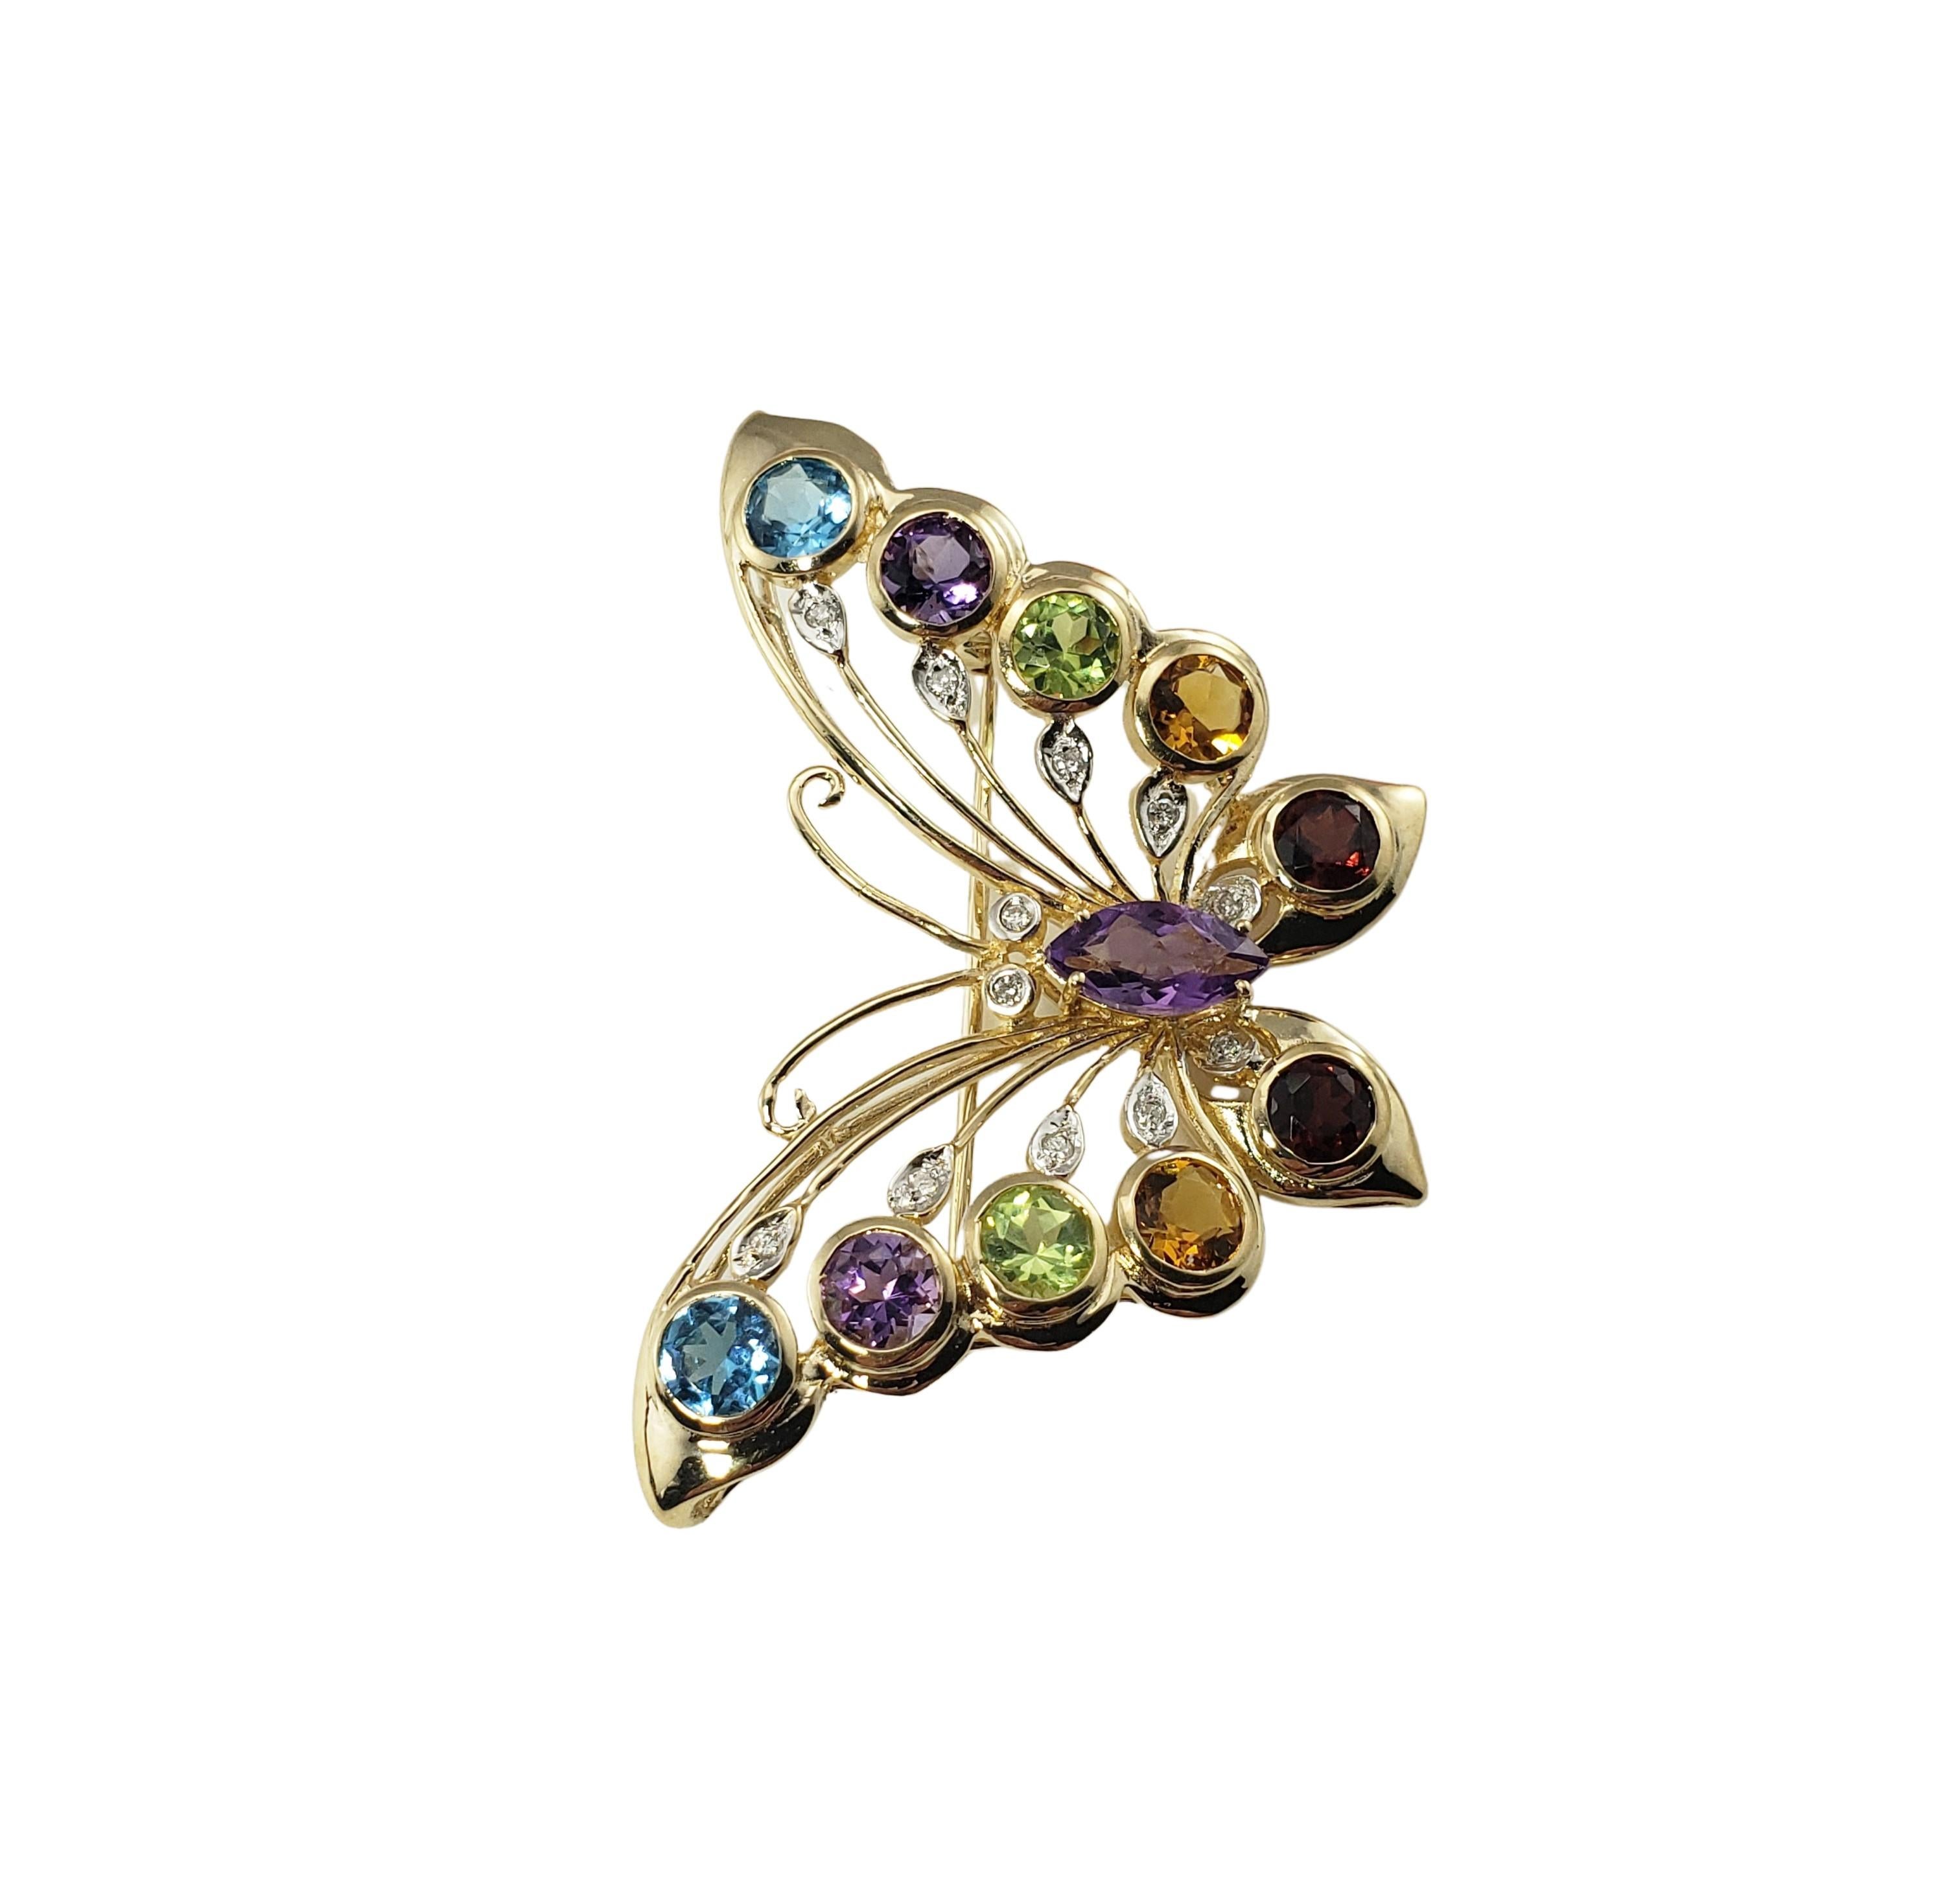 14 Karat Yellow Gold and Gemstone Butterfly Brooch/Pin-

This lovely butterfly brooch features 11 gemstones (amethyst, aquamarine, citrine, garnet and peridot) and 12 round brilliant cut diamonds set in beautifully detailed 14K yellow gold. 